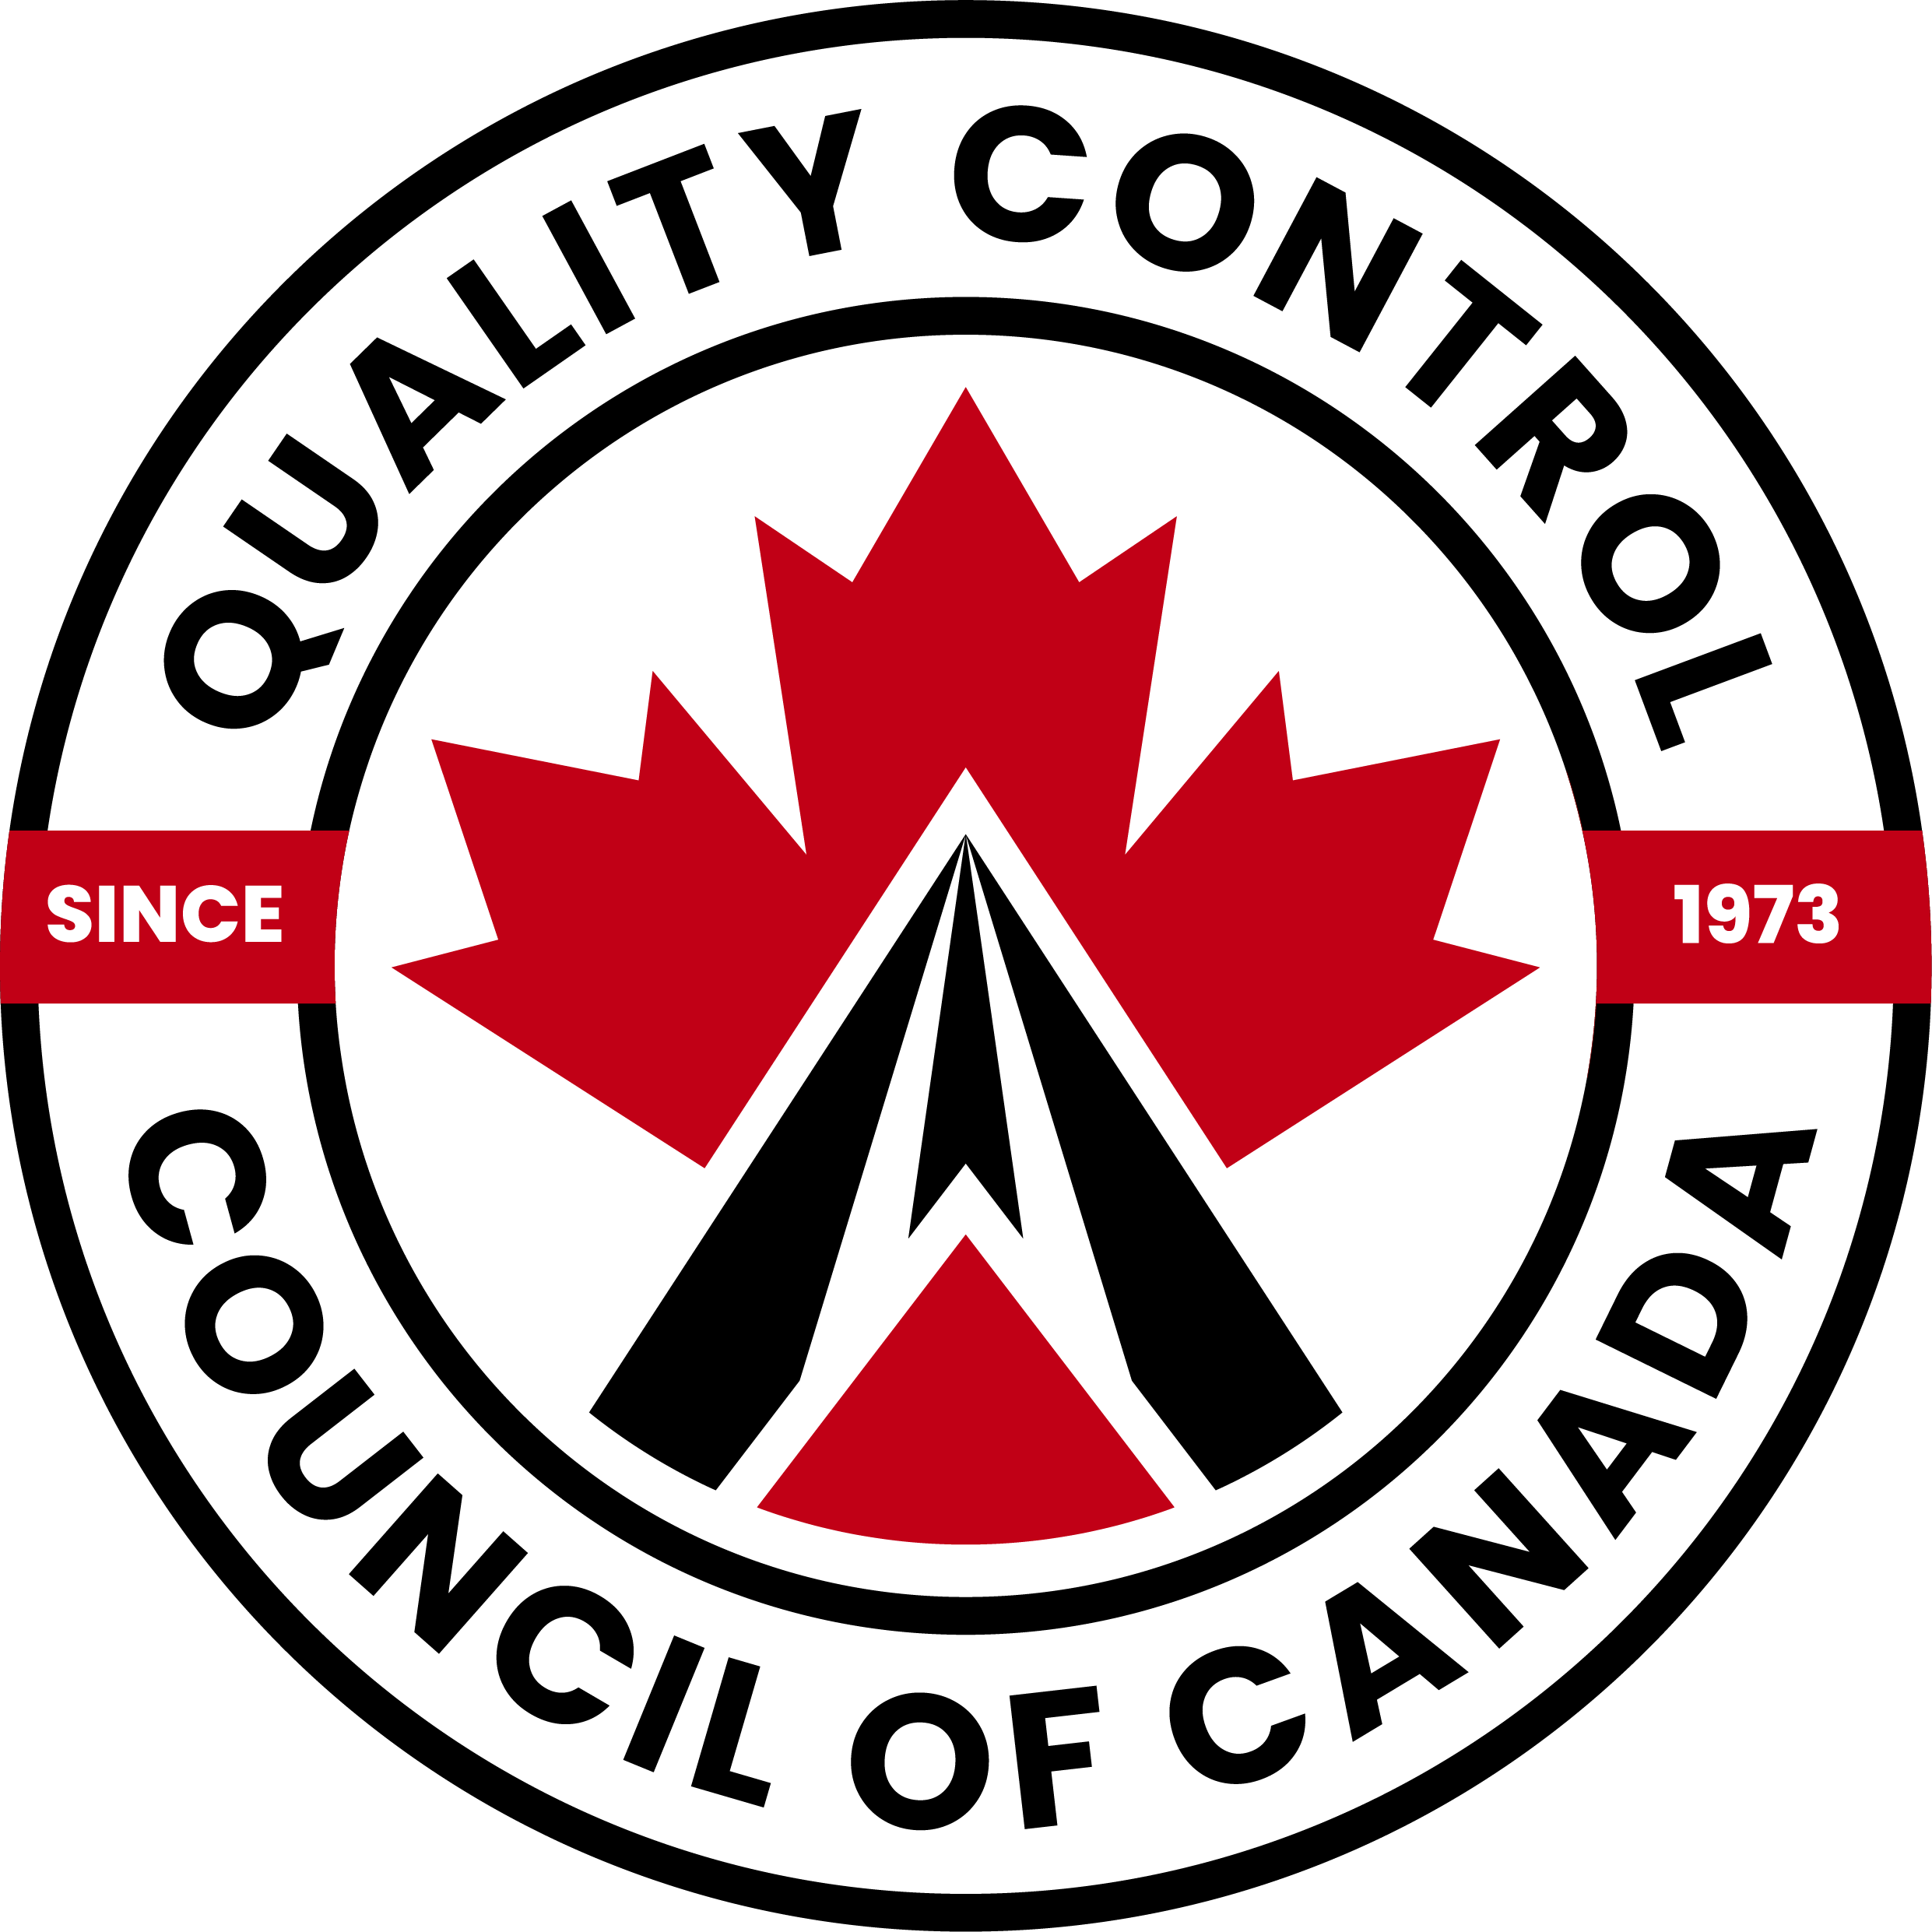 The new QCCC Logo